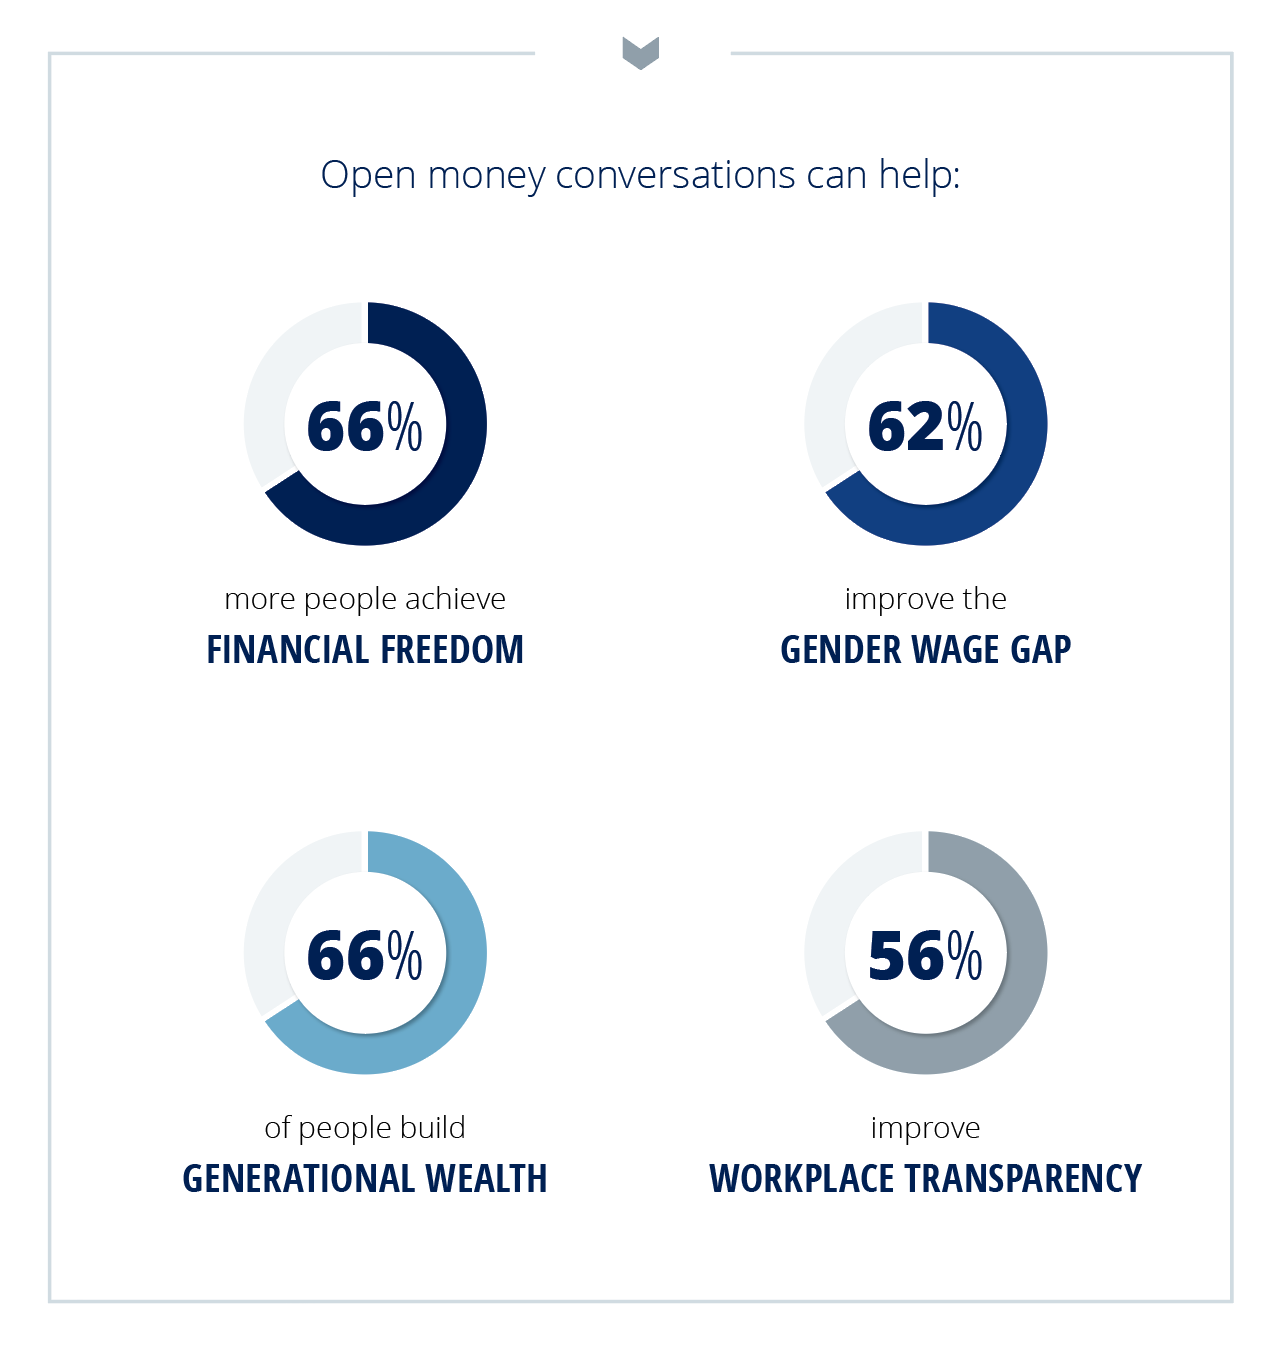 Graphic showing open money conversations can help